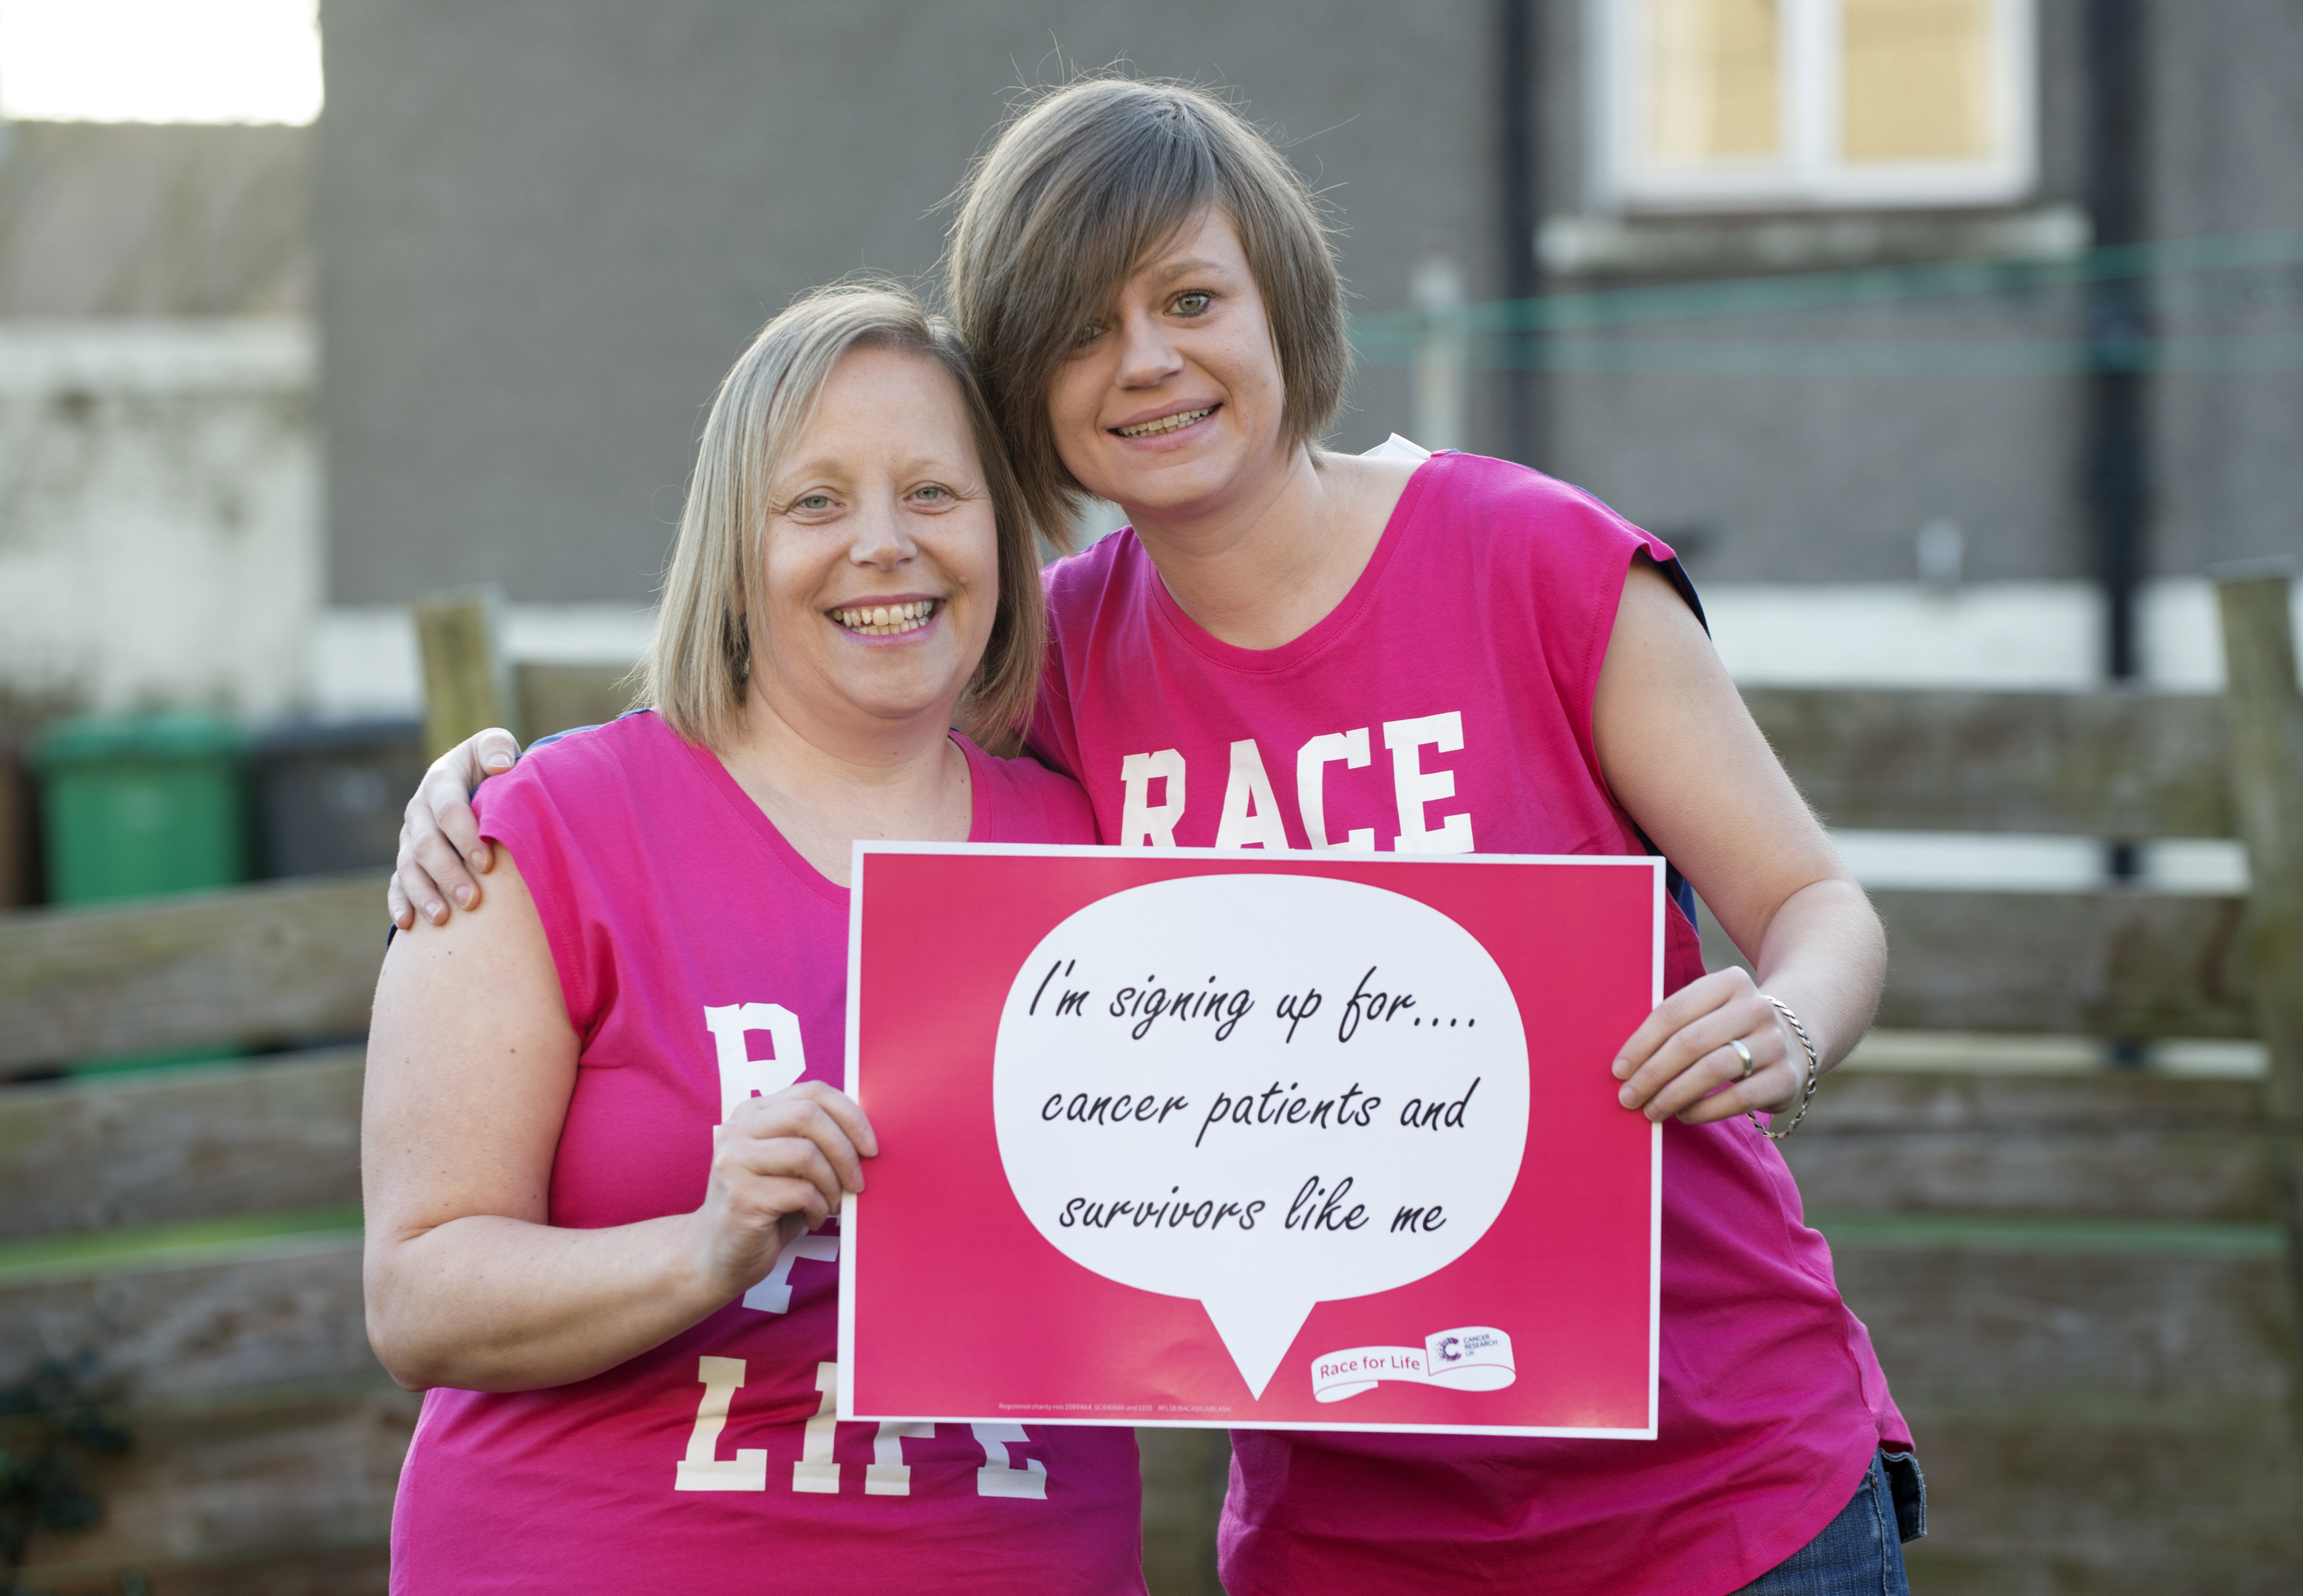 Cancer survivor Lindsay Blake has teamed up with her daughter Stephanie to urge Scots to sign up for Race For Life.